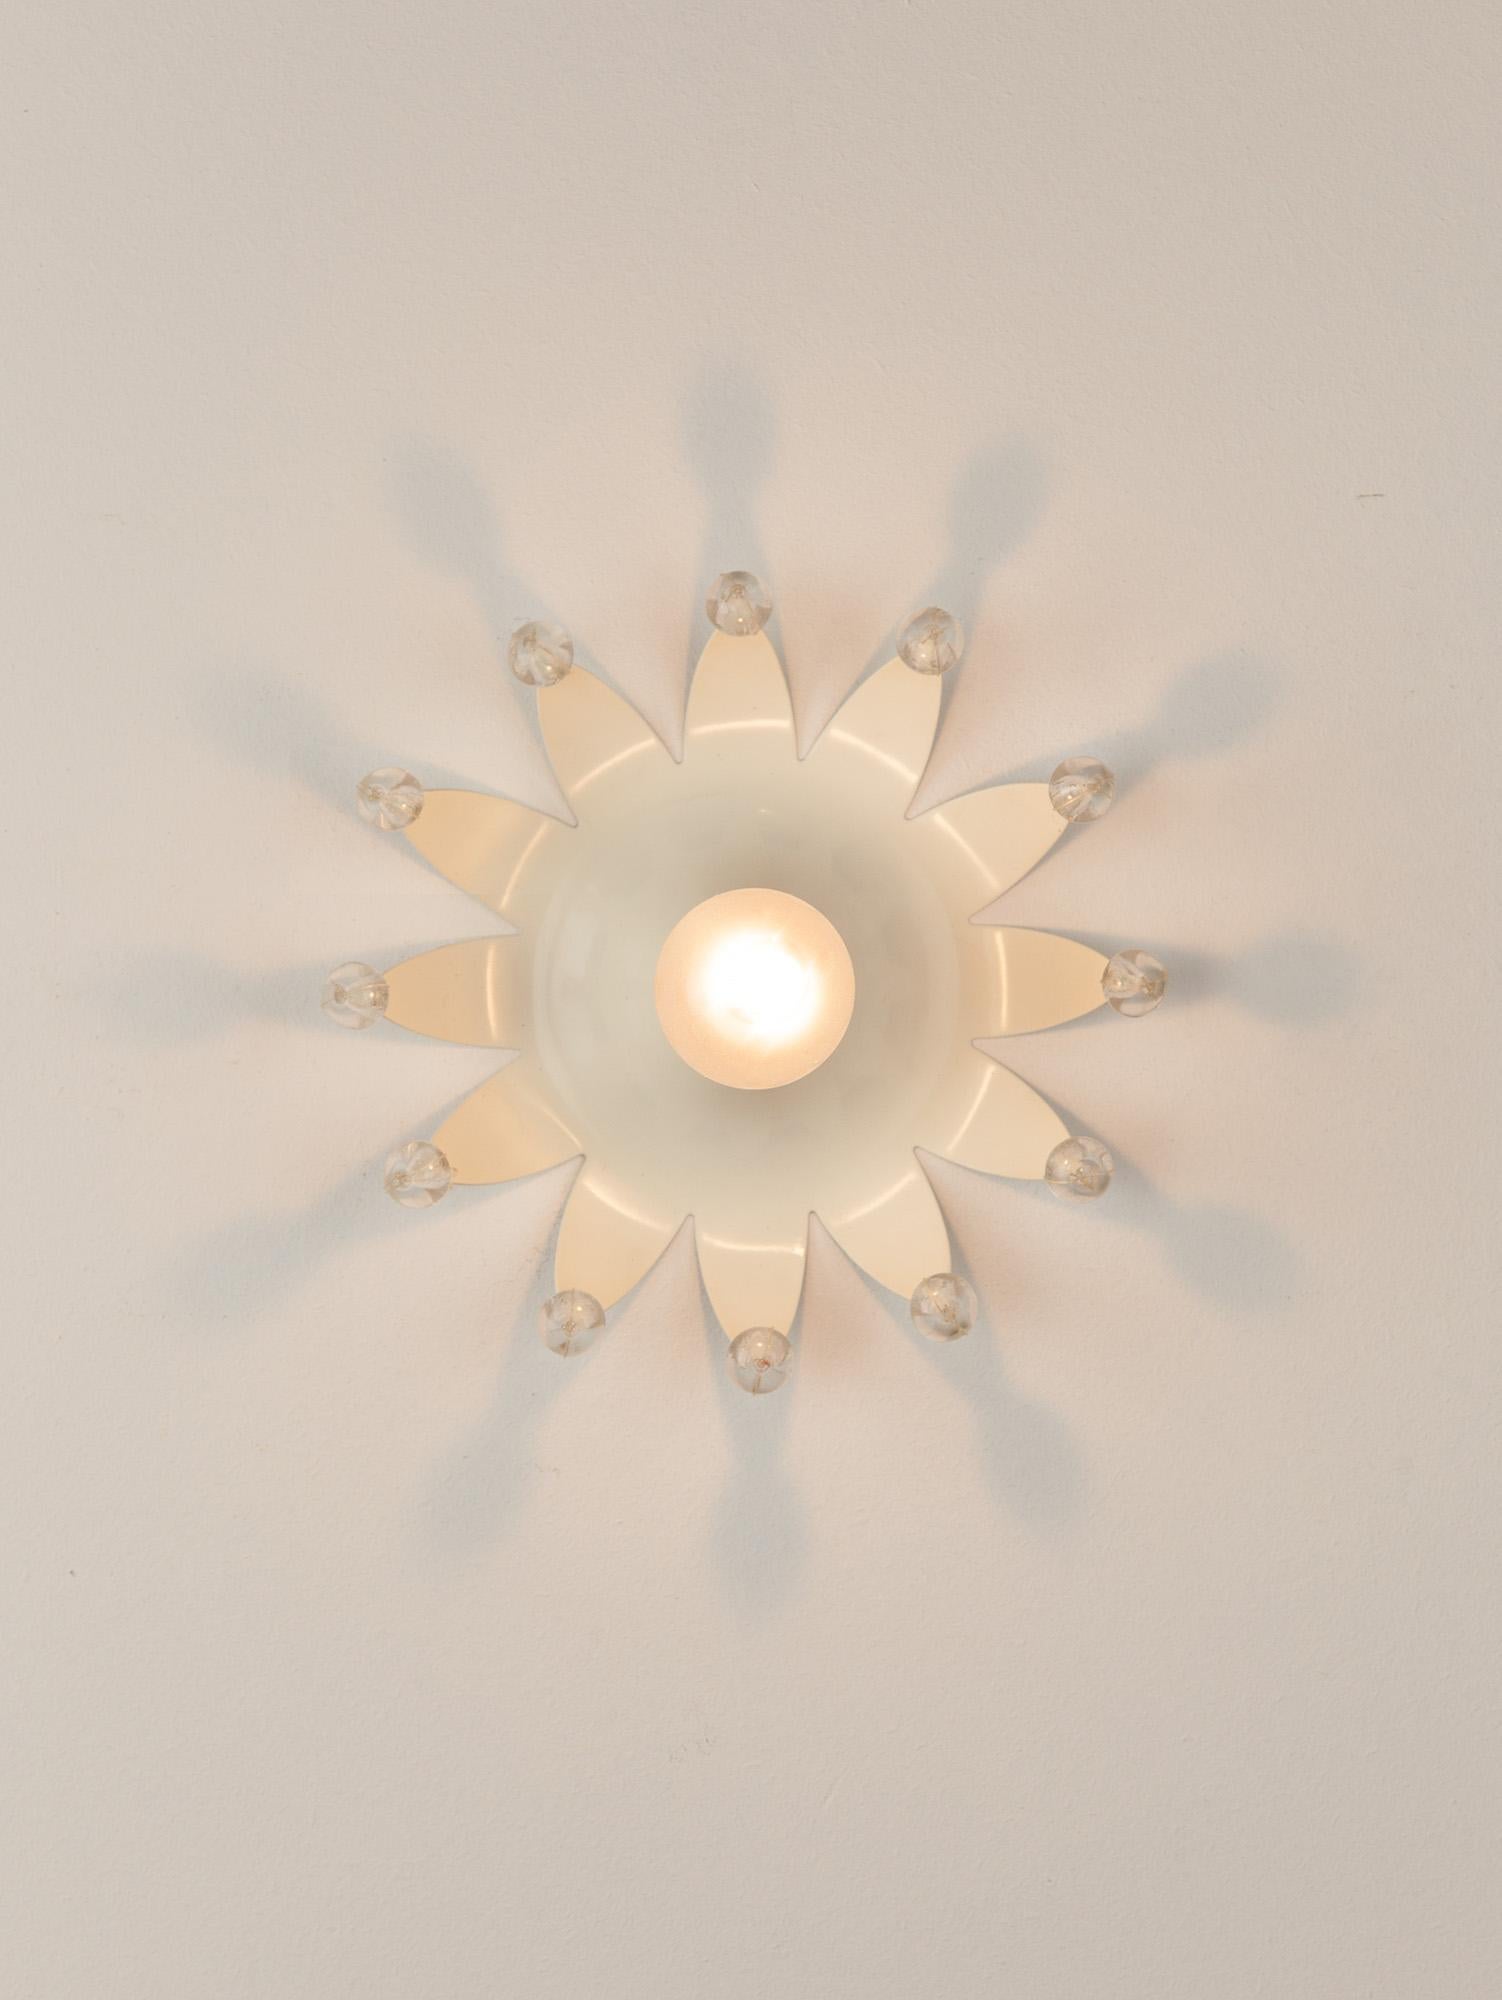 Rare and sweet Emil Stejner wall light for Rupert Nikoll with fine brass details. The petal shaped edge of the white-cream metal body is dotted with 12 clear acrylic spheres. Emitting a lovely starburst pattern from it's playful shape the wall light